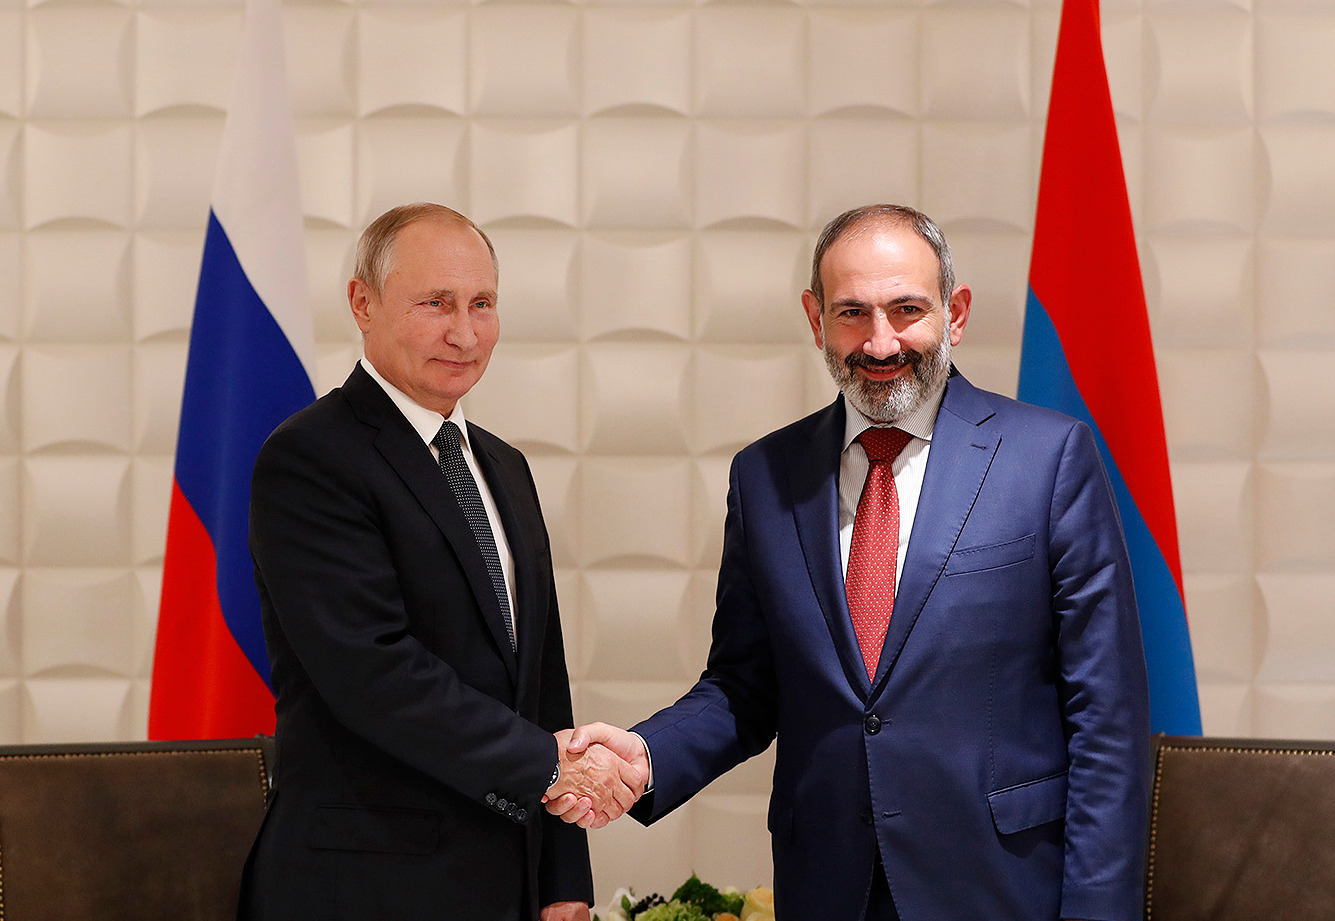 Armenian Prime Minister: We relied on the Russians for our security and now we are paying the price for that